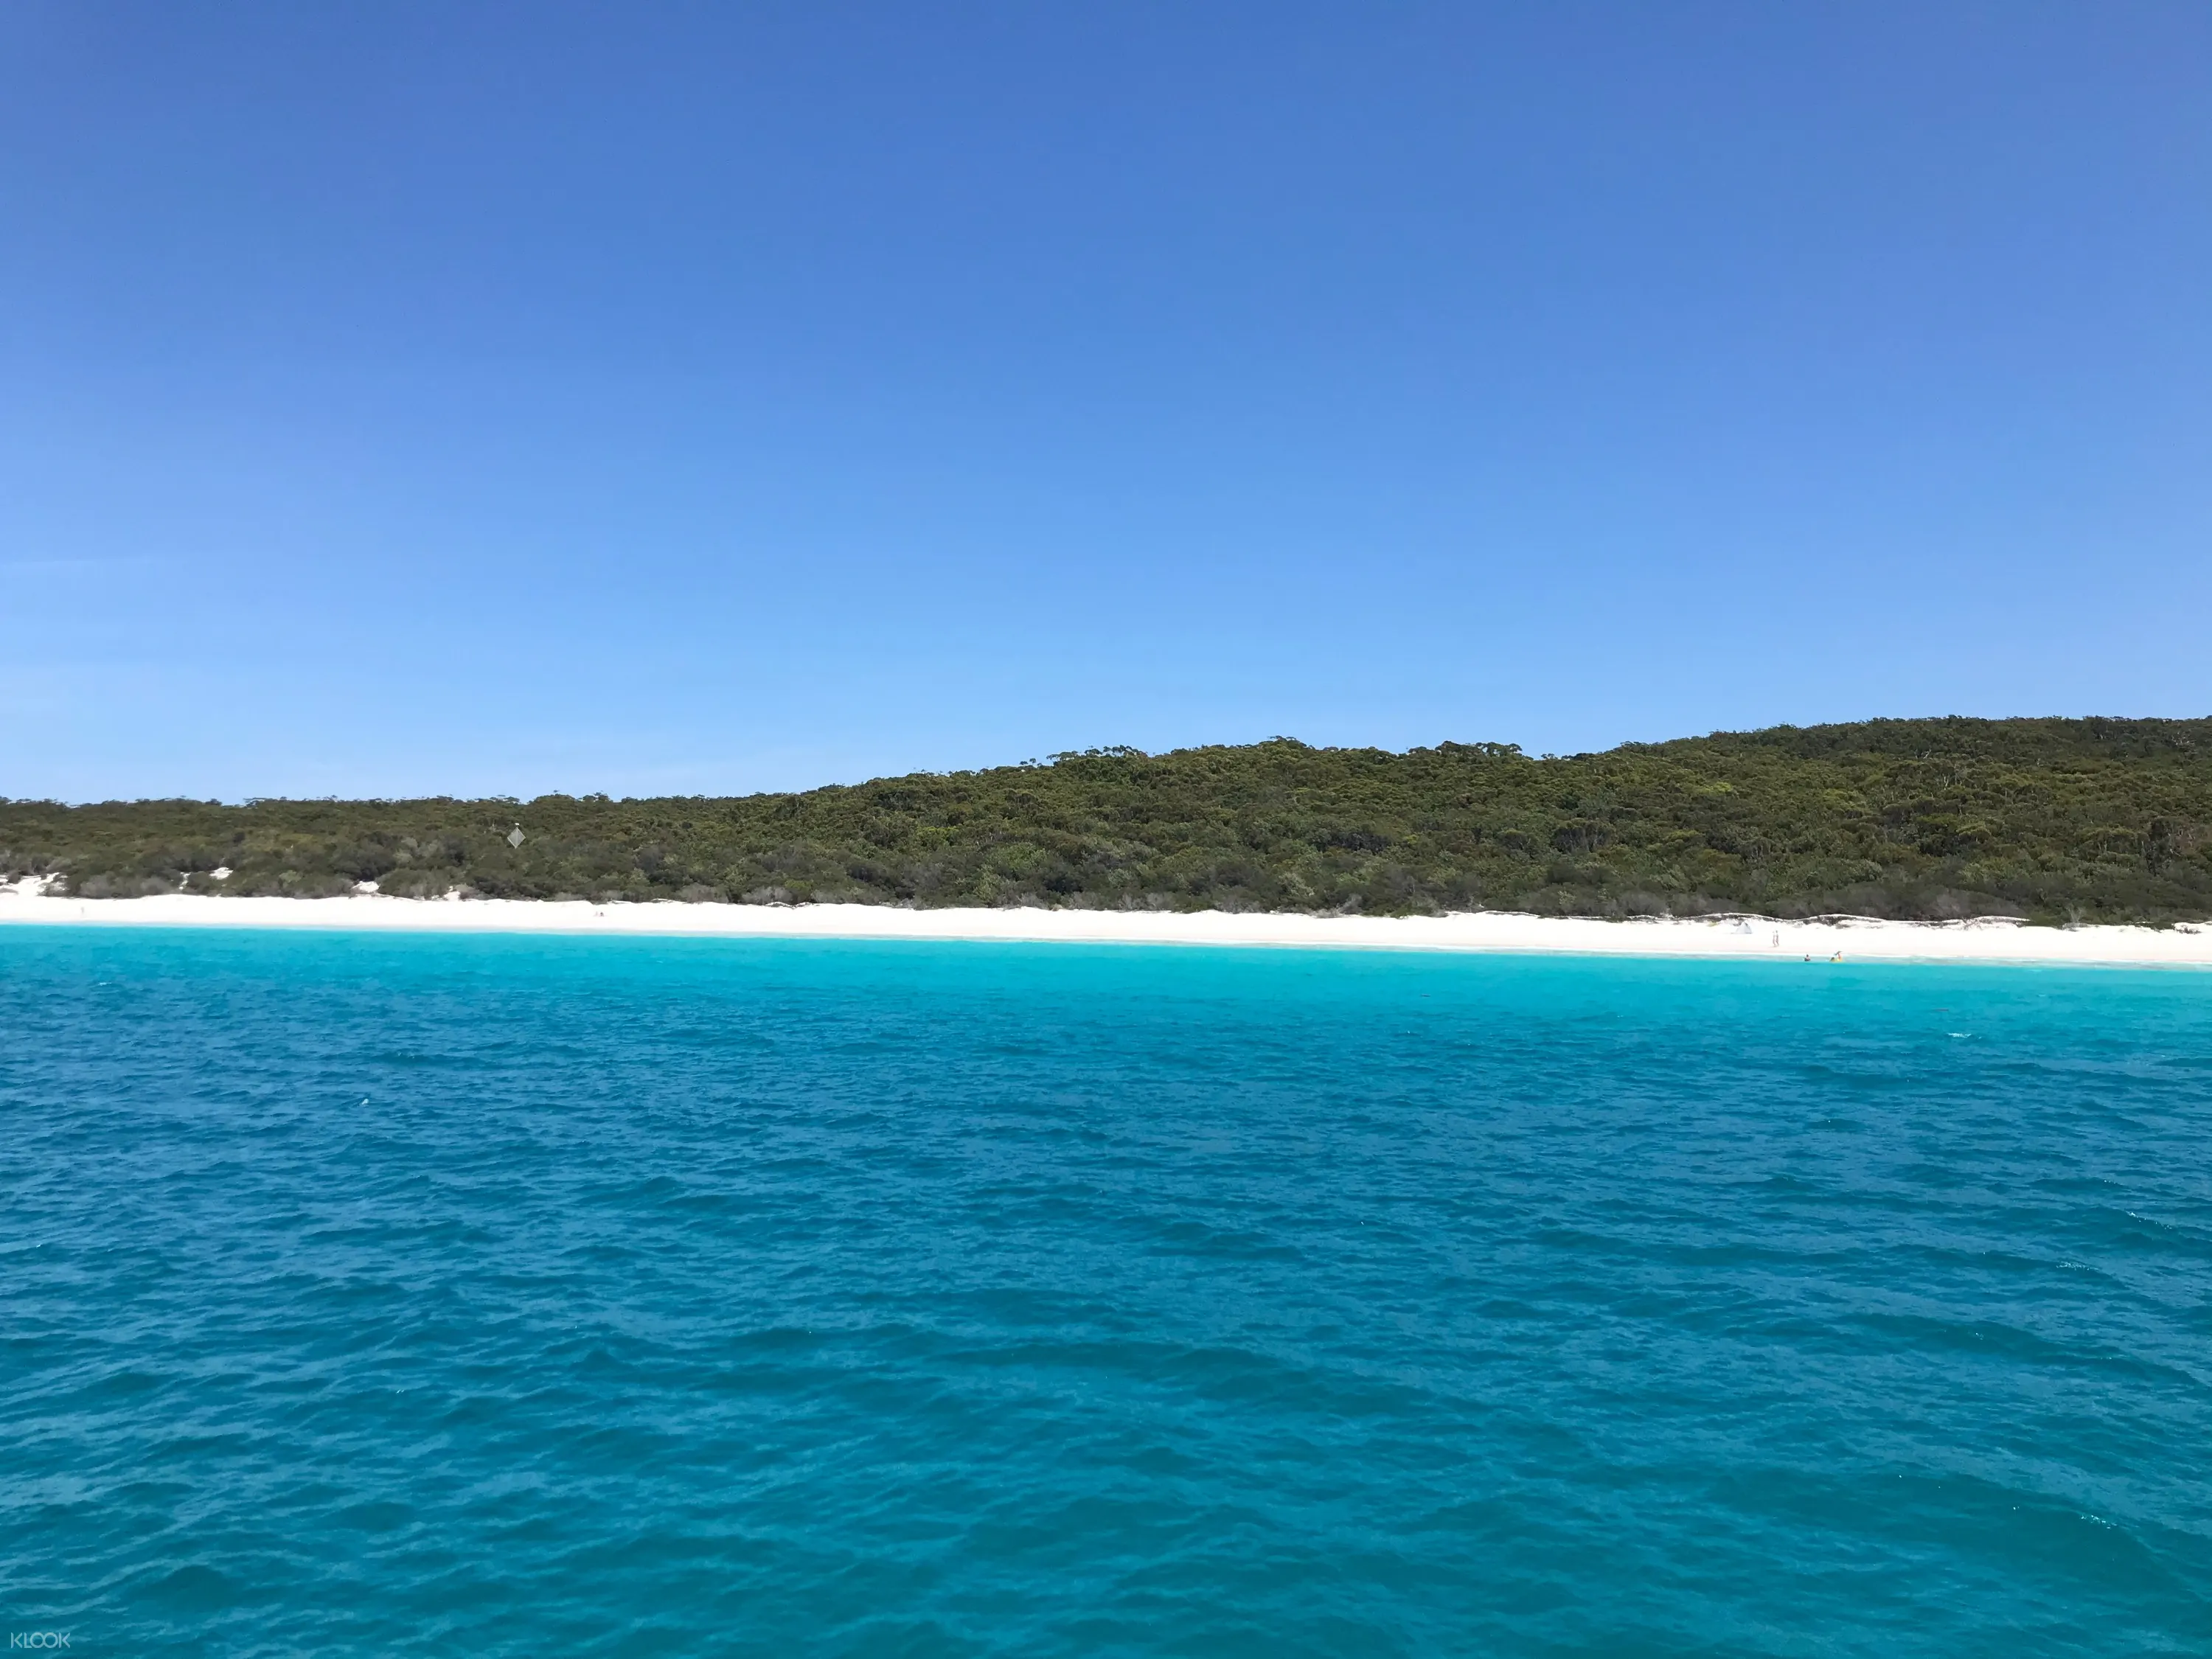 Jervis Bay Dolphin Cruise Klook Us